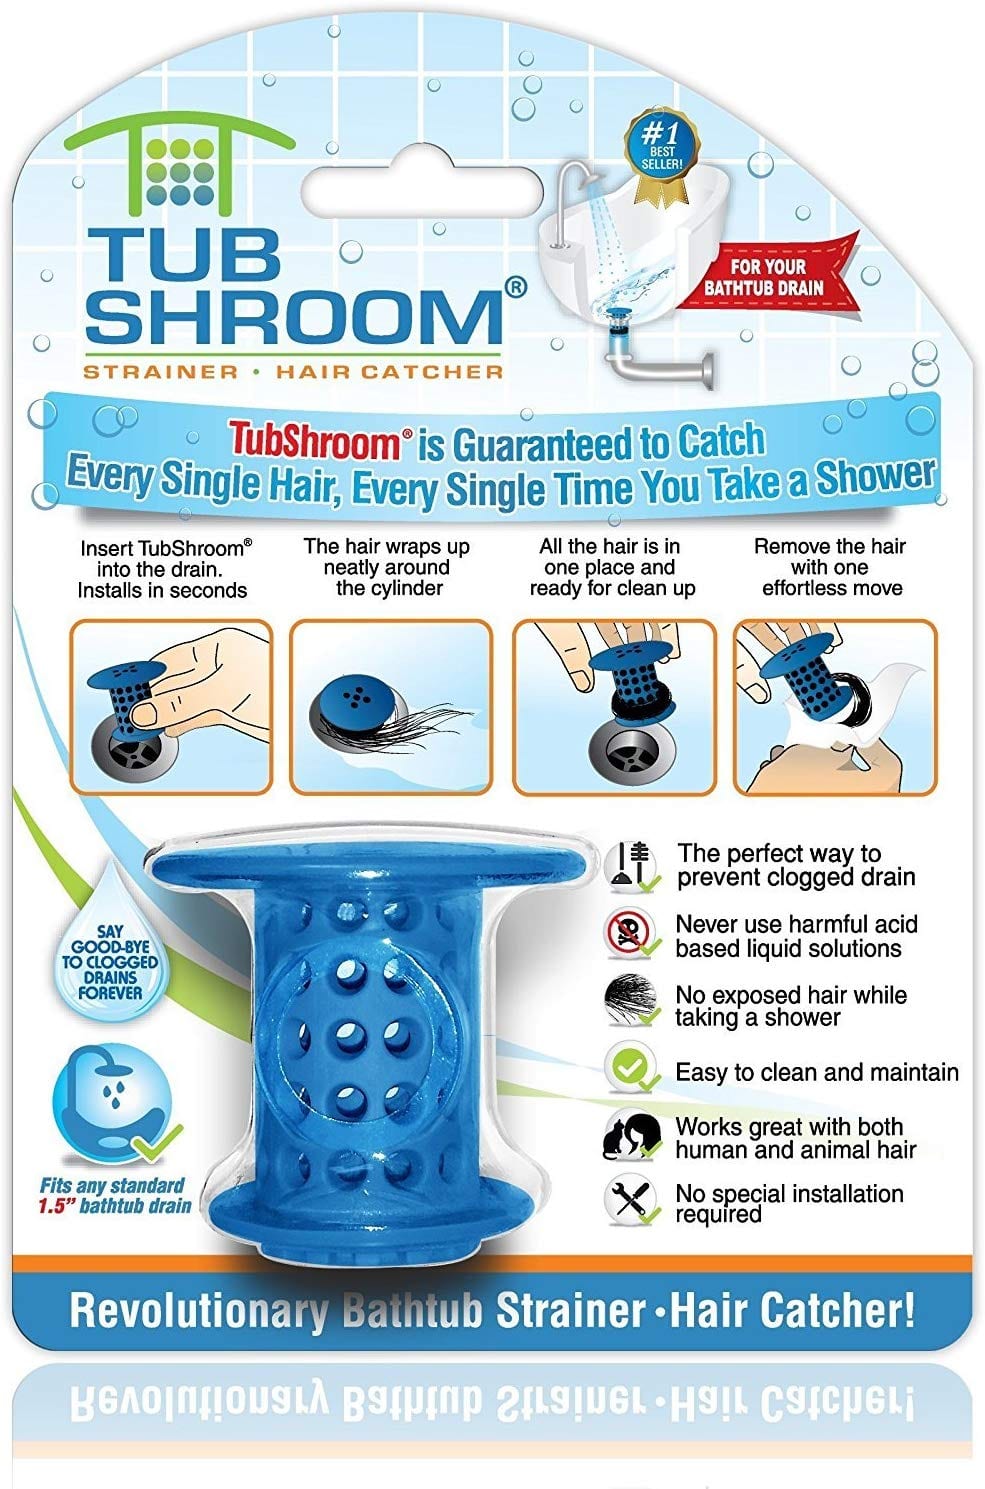 Tubshroom Strainer and Hair Catcher